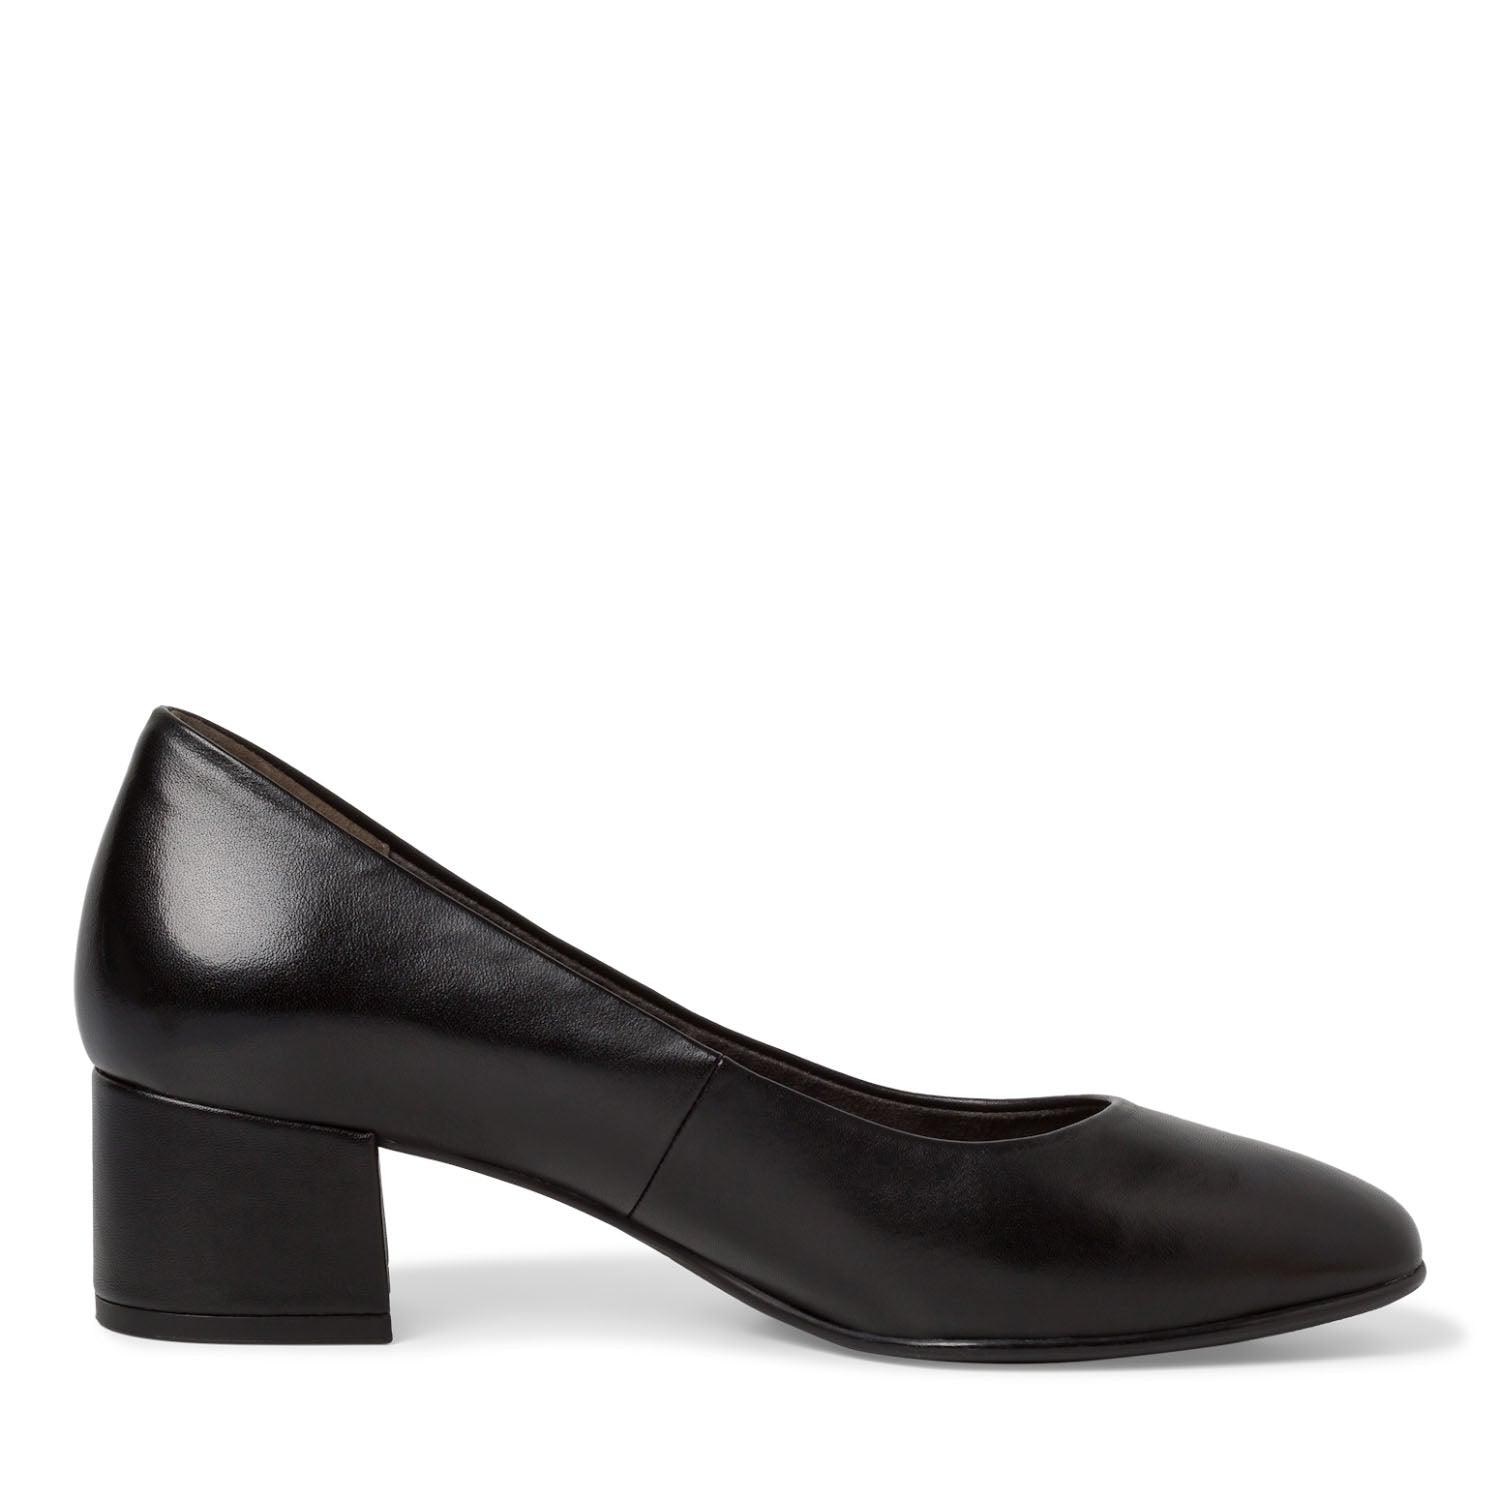 Angled view of the Black Block Heel Court Shoe.